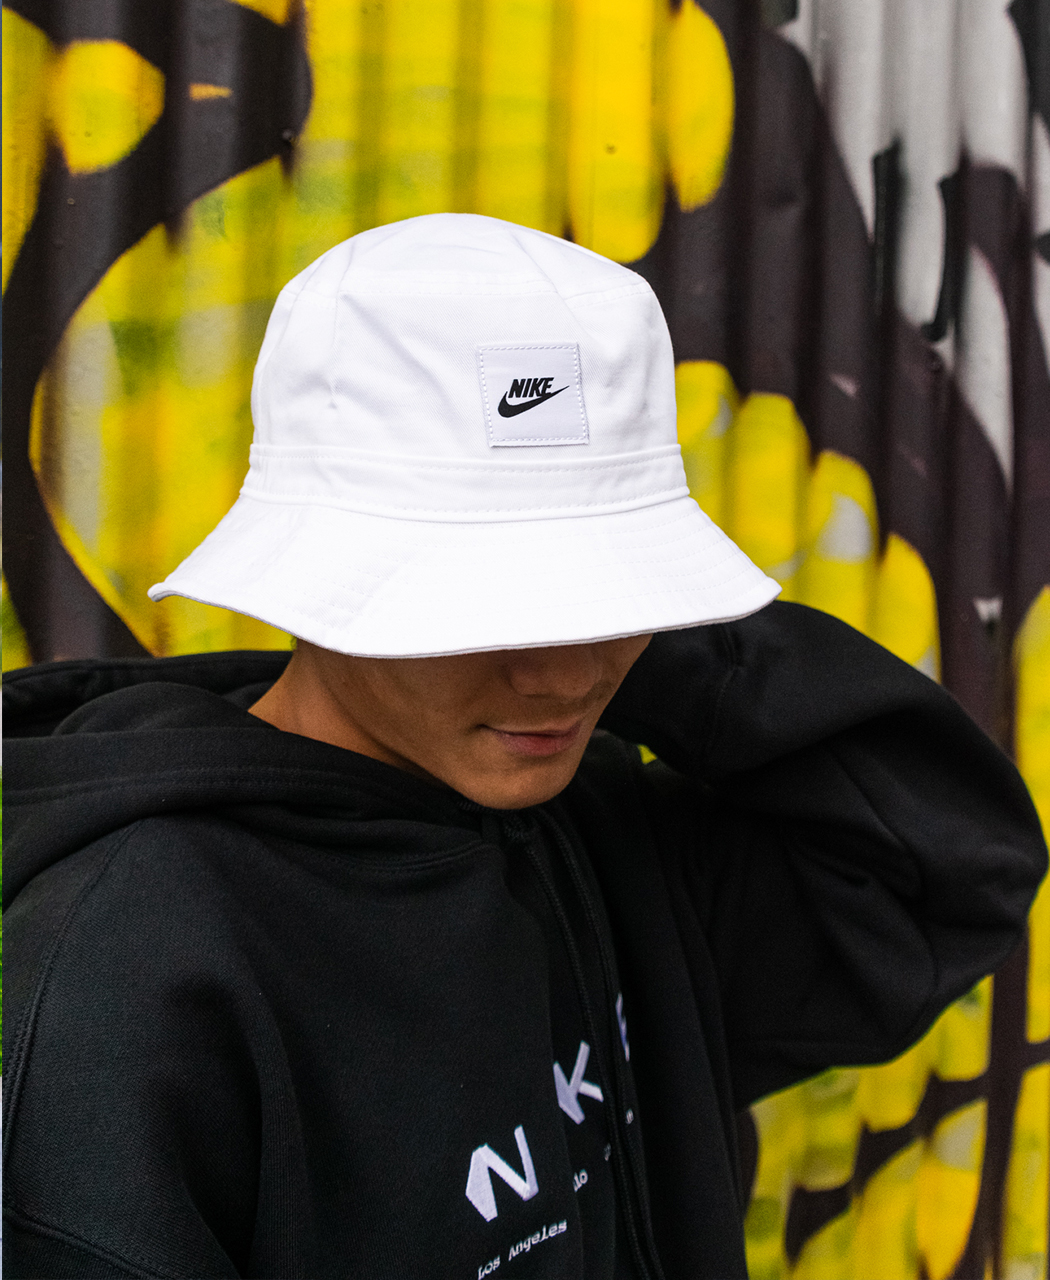 Color | HAT Finest - Skates | - out Skateboardings BUCKET Sold HATS CORE NIKE WHITE SPORTSWEAR Athens